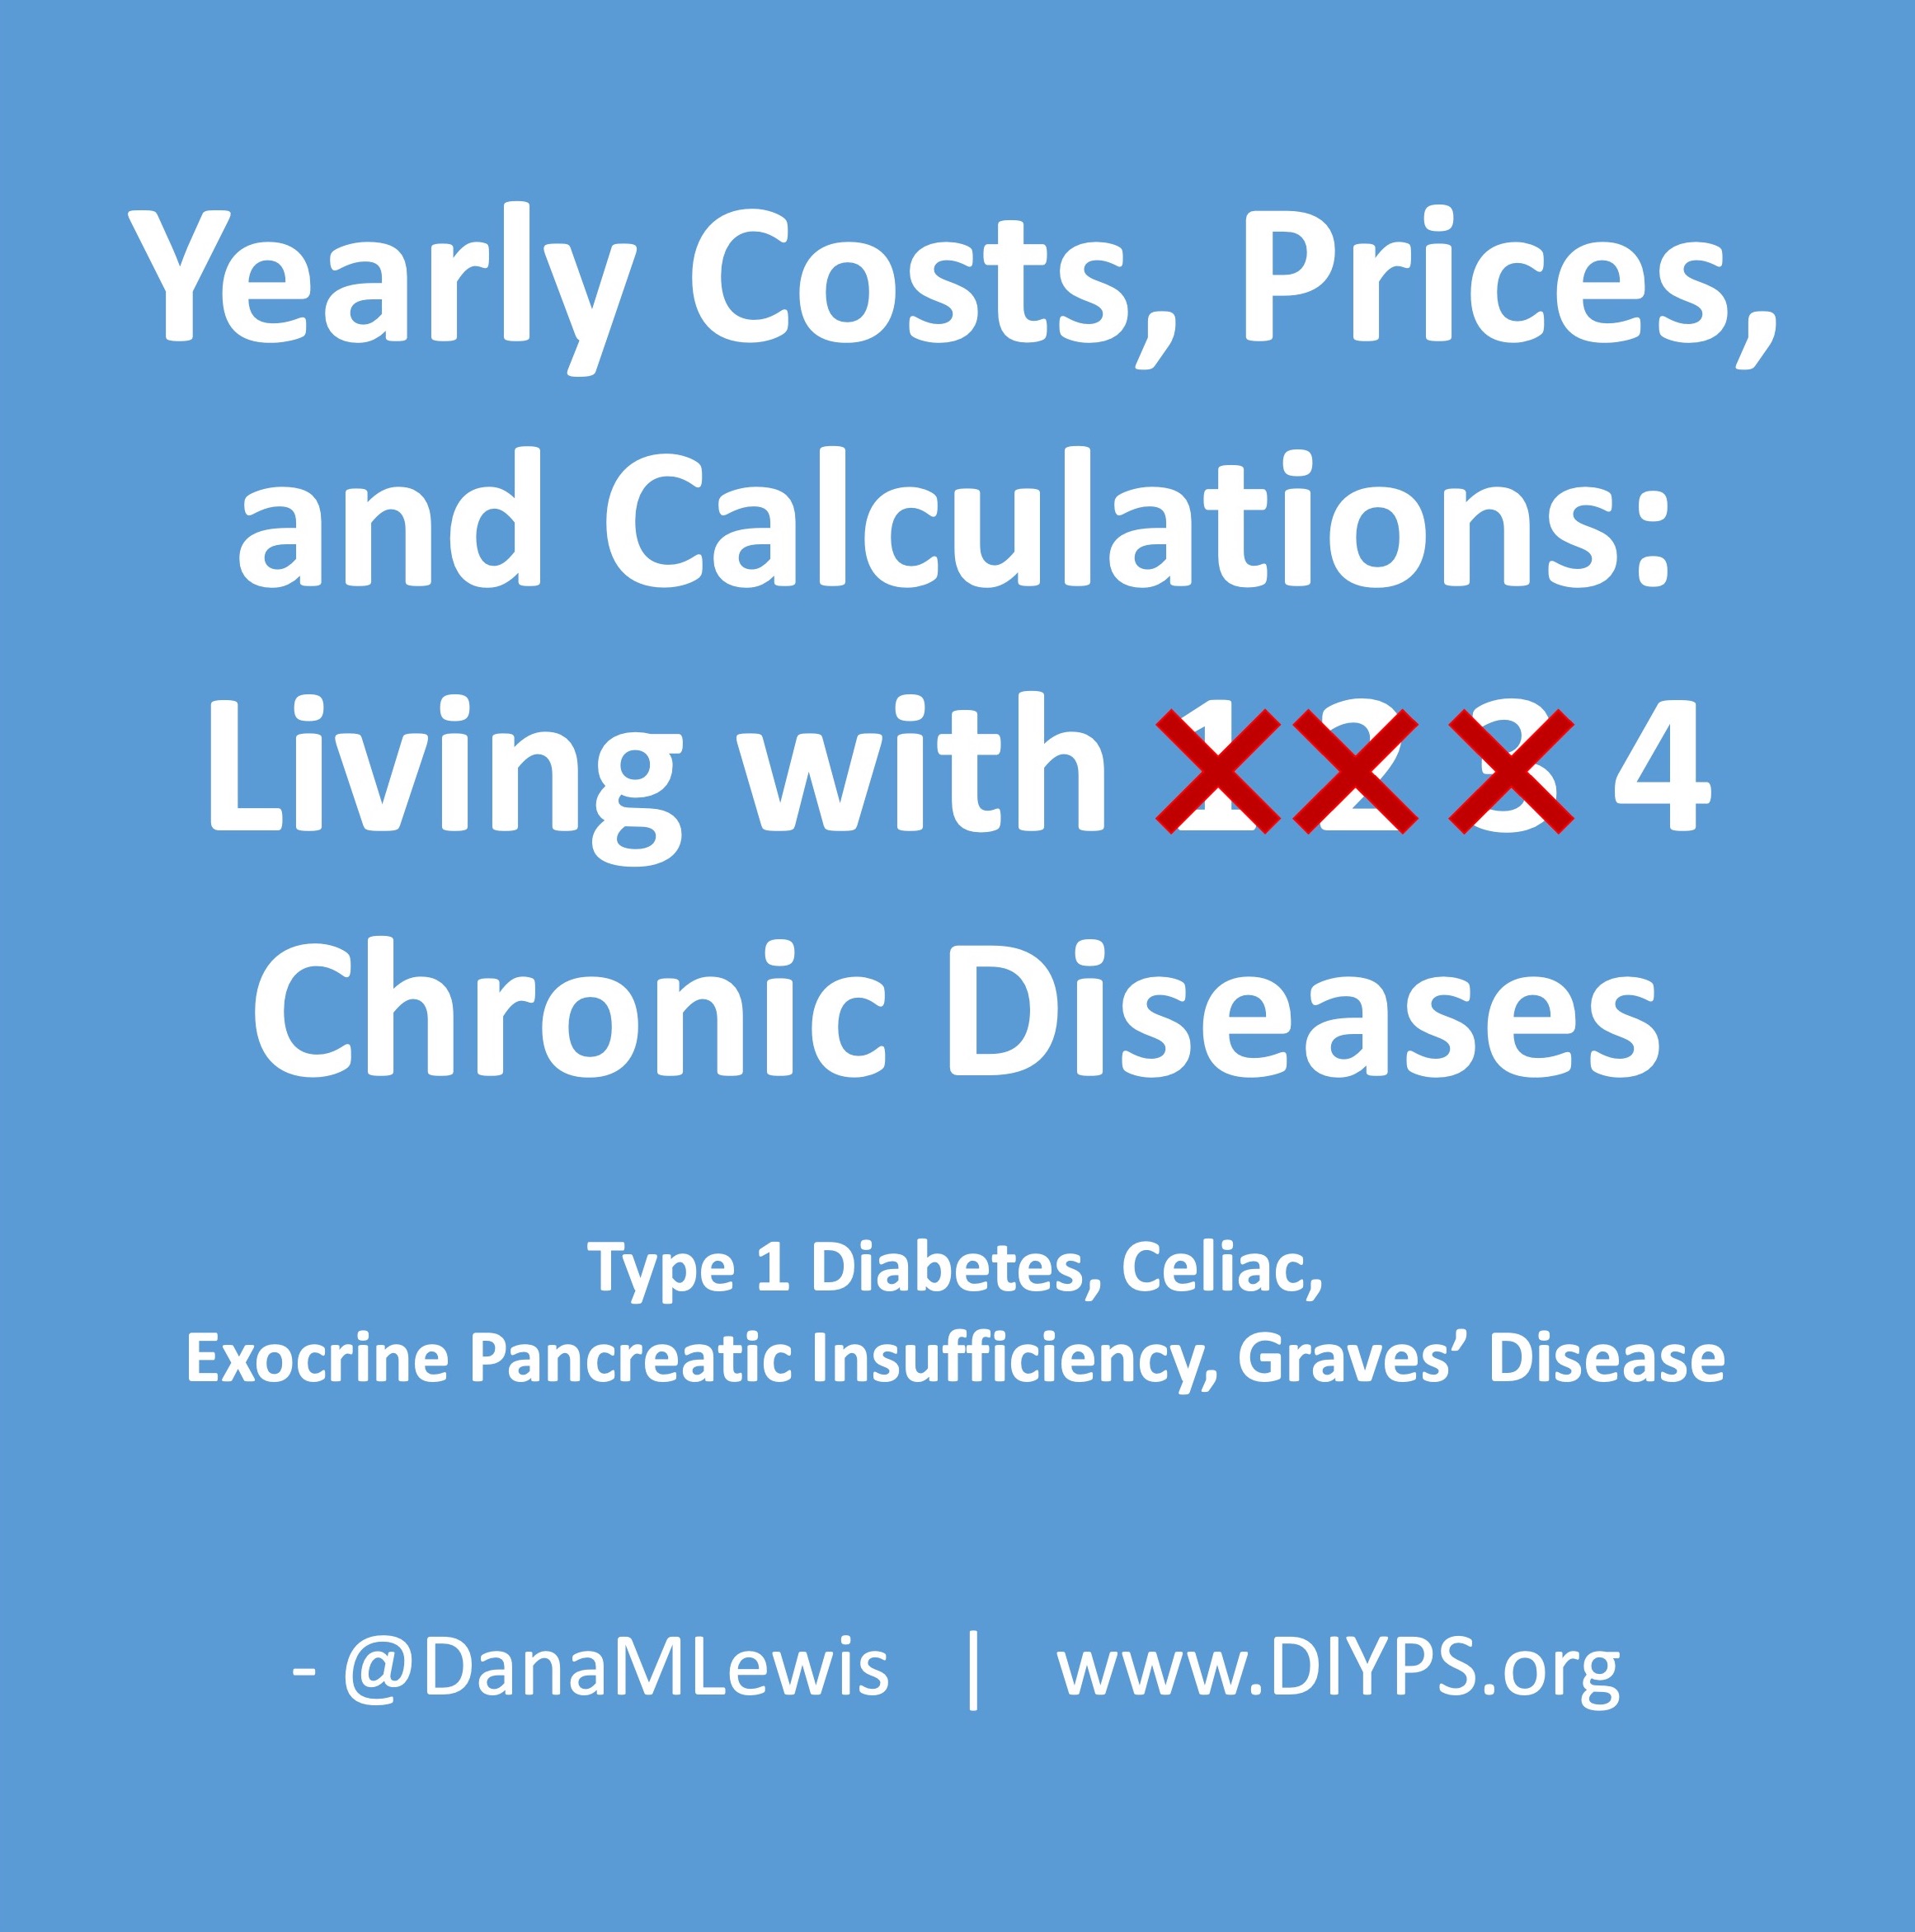 Yearly costs, prices, and calculations of living with 4 chronic diseases (type 1 diabetes, celiac, Graves, and exocrine pancreatic insufficiency)